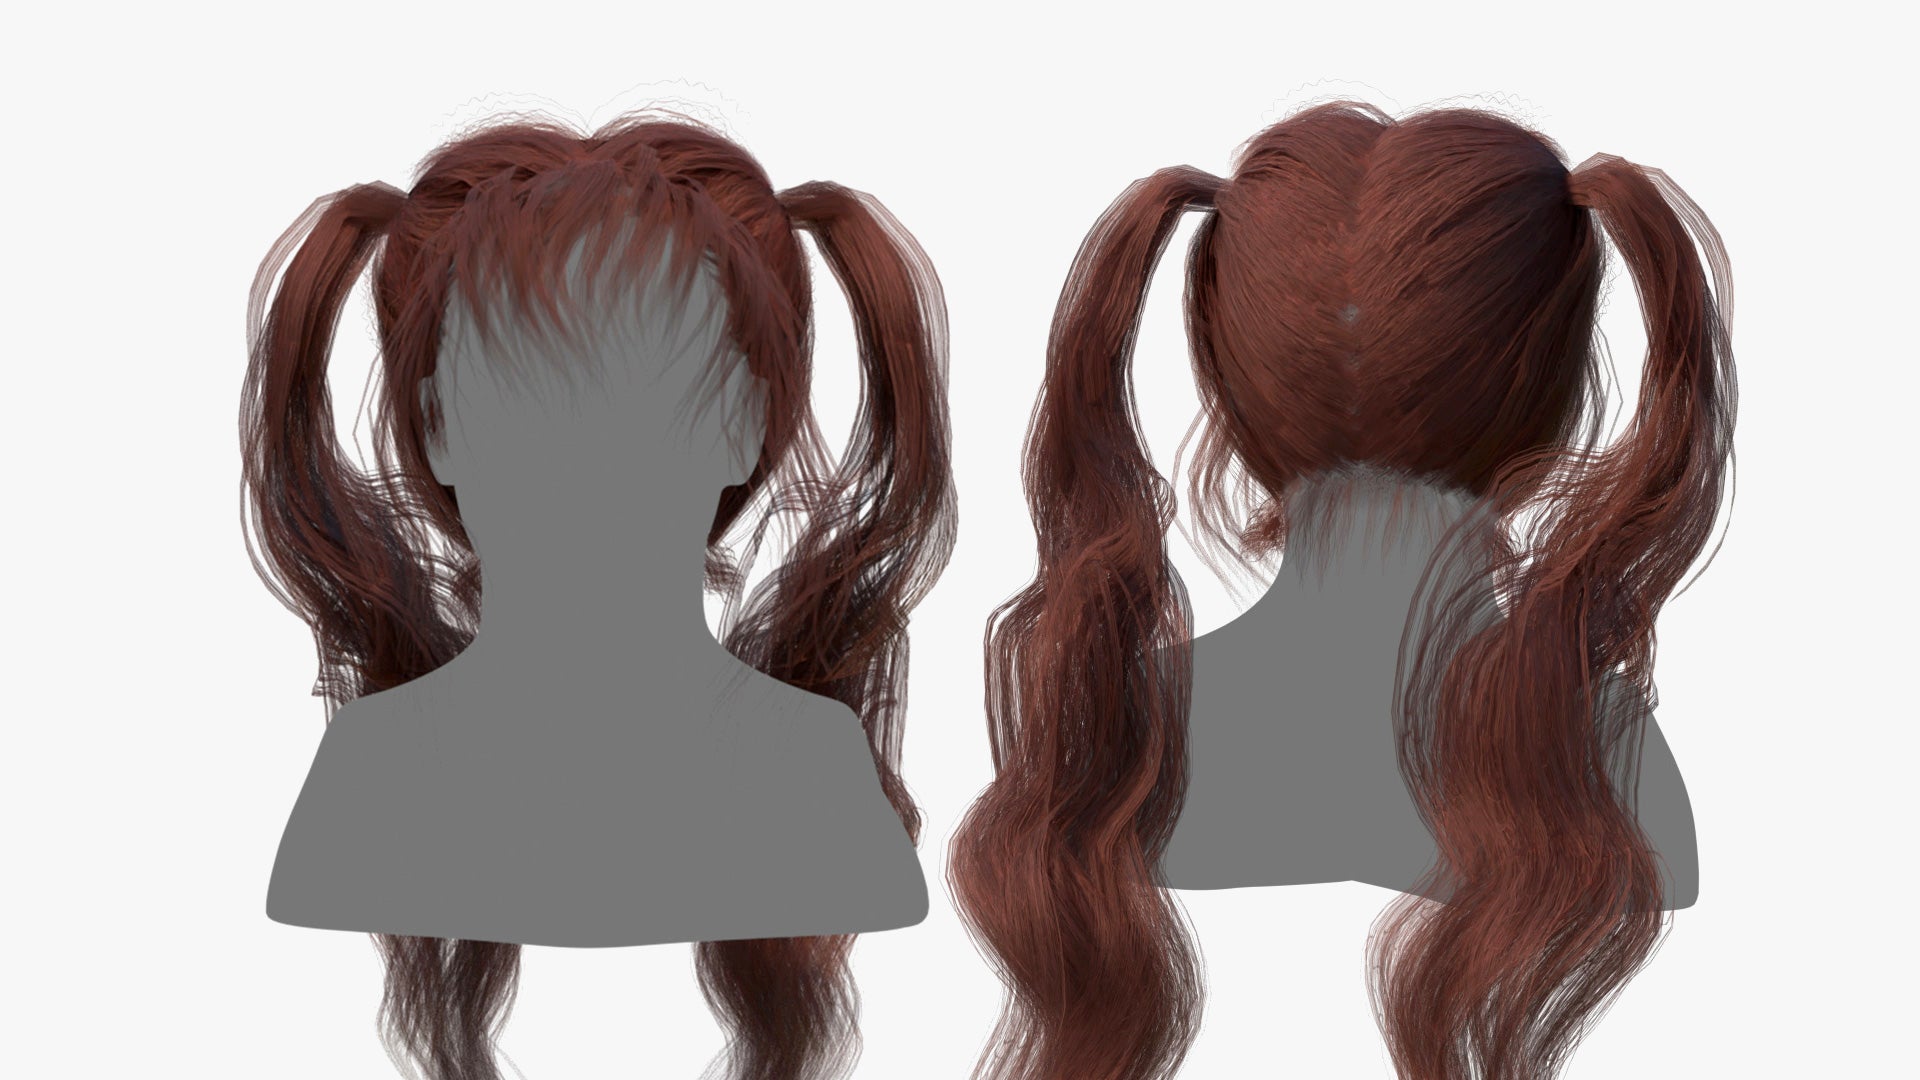 Long manga style ponytails hair 3D model in OBJ with lowpoly and PBR textures by Heledahn